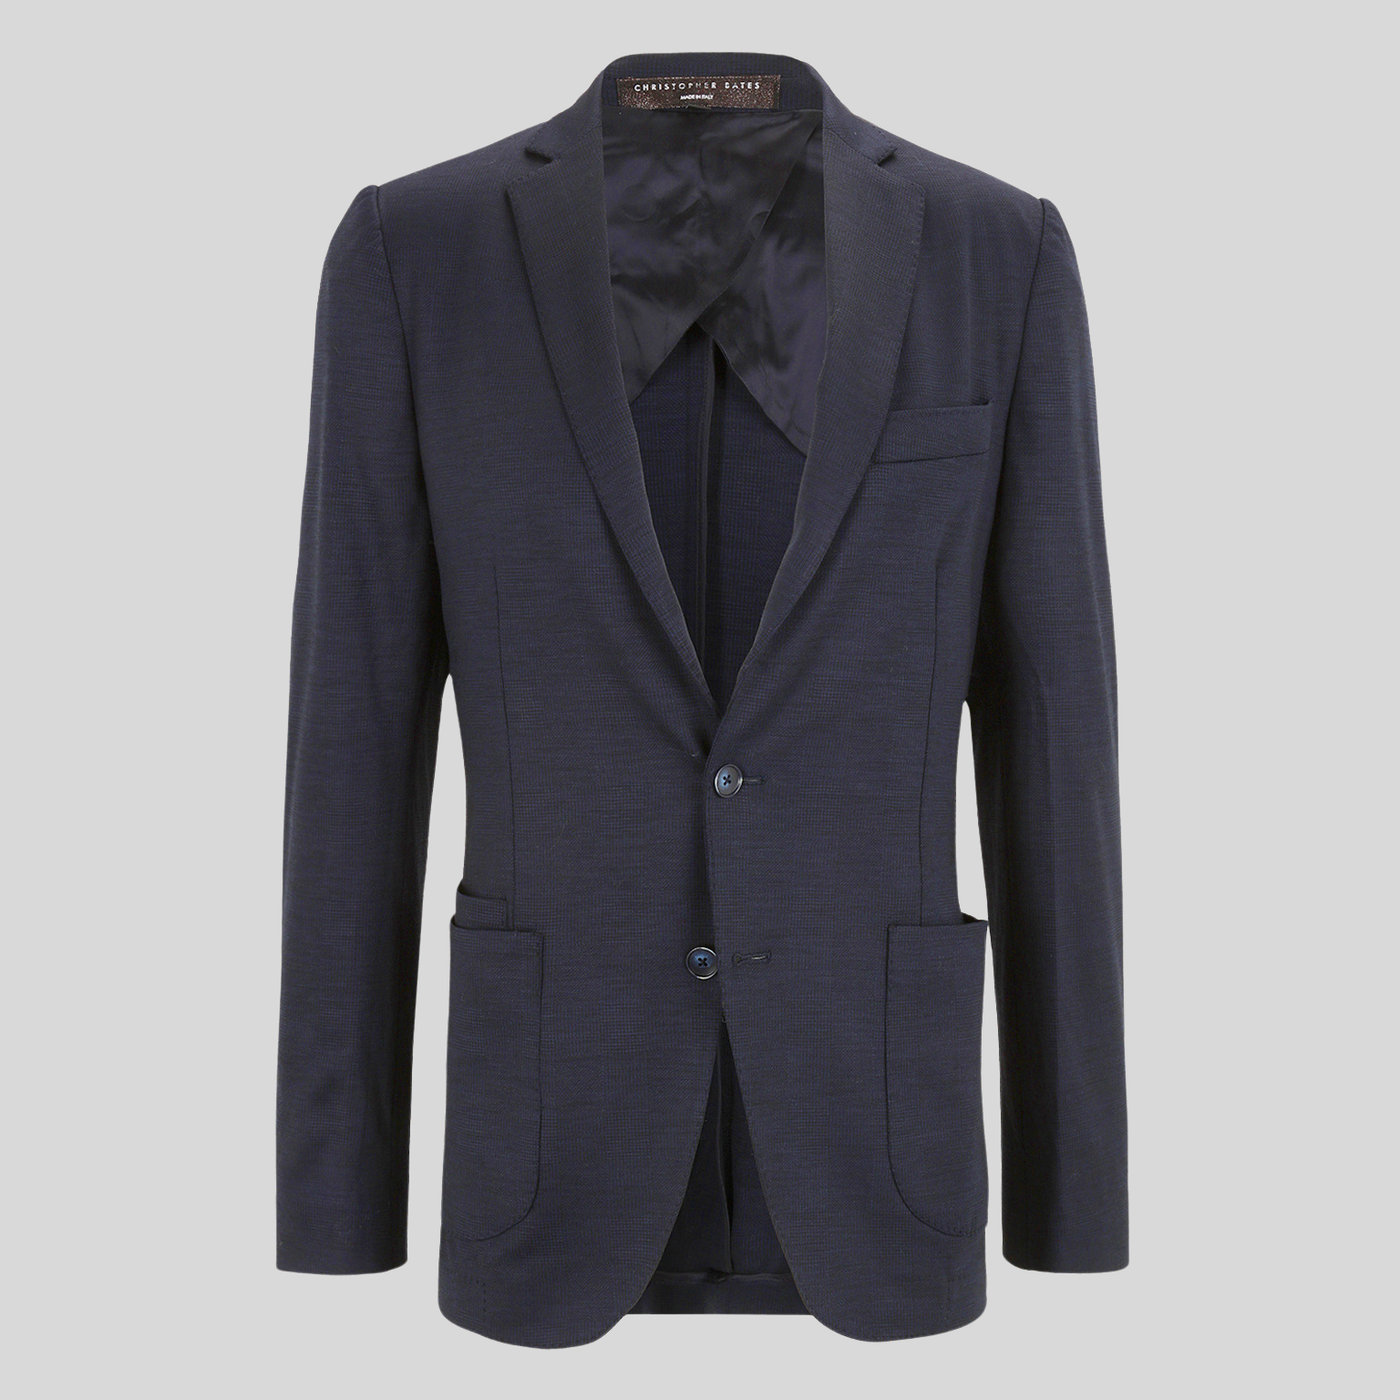 Gotstyle Fashion - Christopher Bates Suits Shadow Plaid Patch Pocket Jersey Blazer - Navy